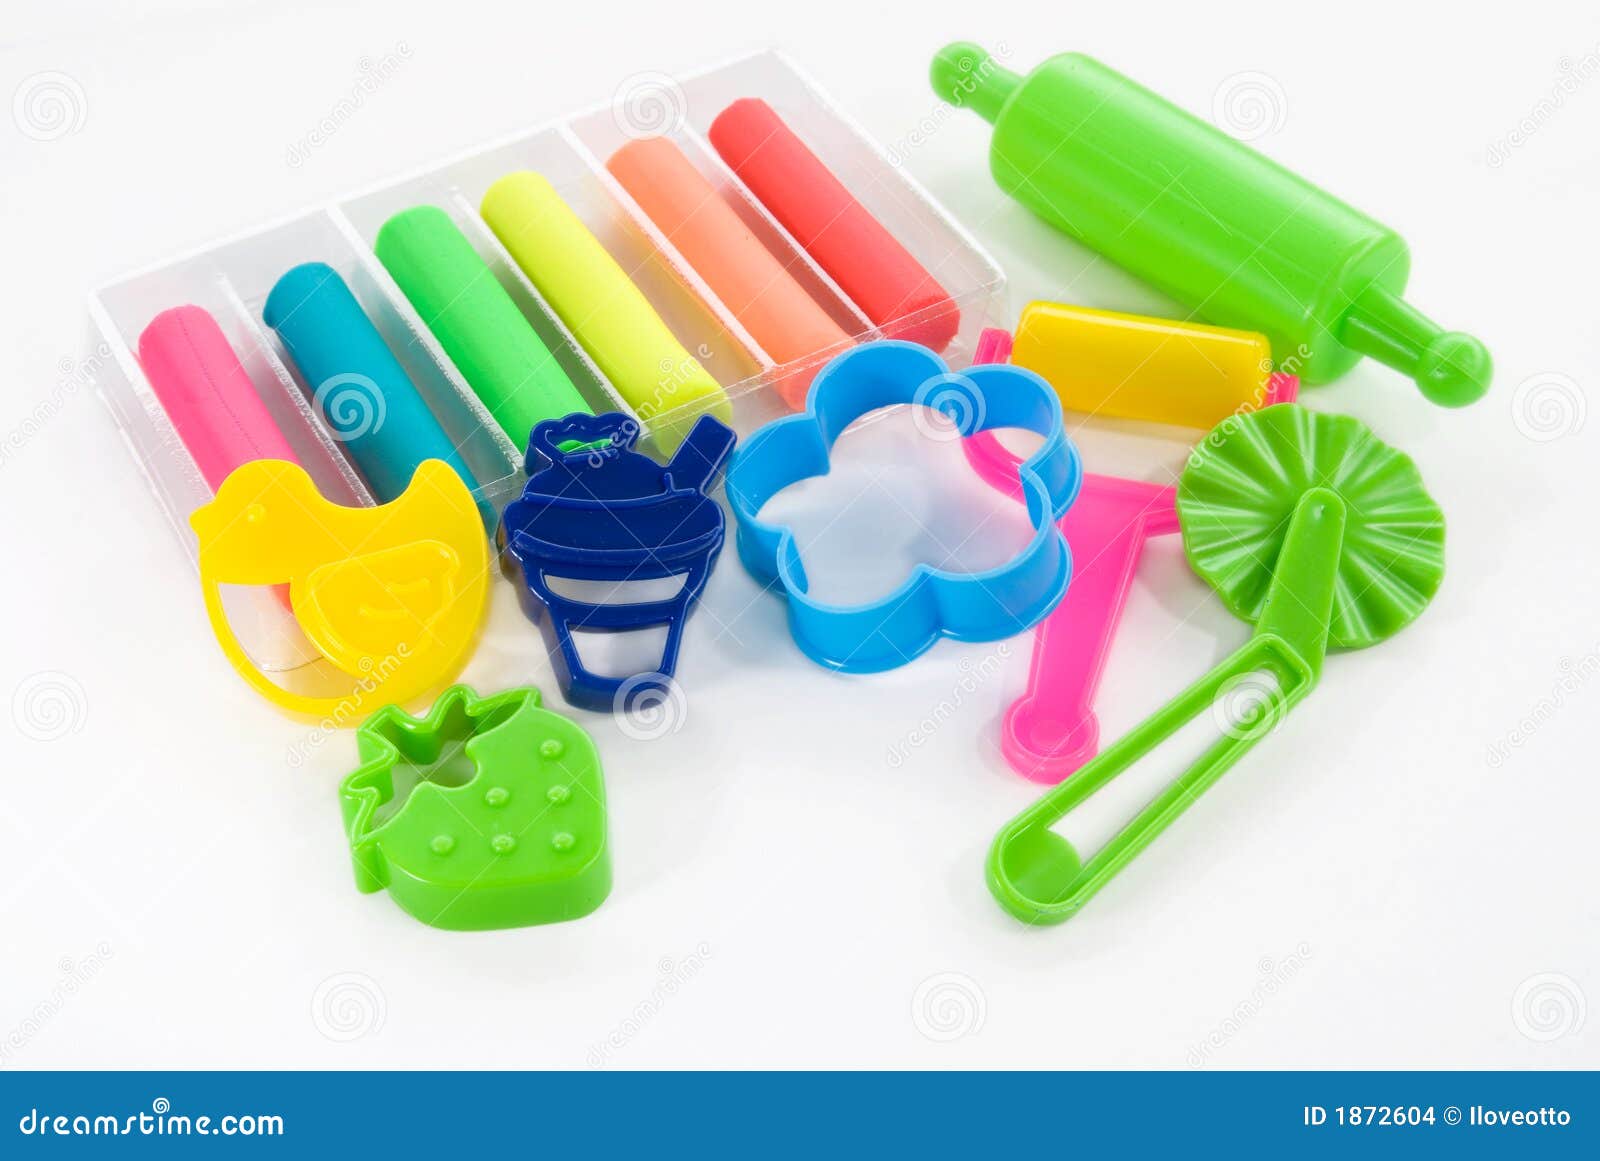 Colorful clay for children stock photo. Image of heap  1872604